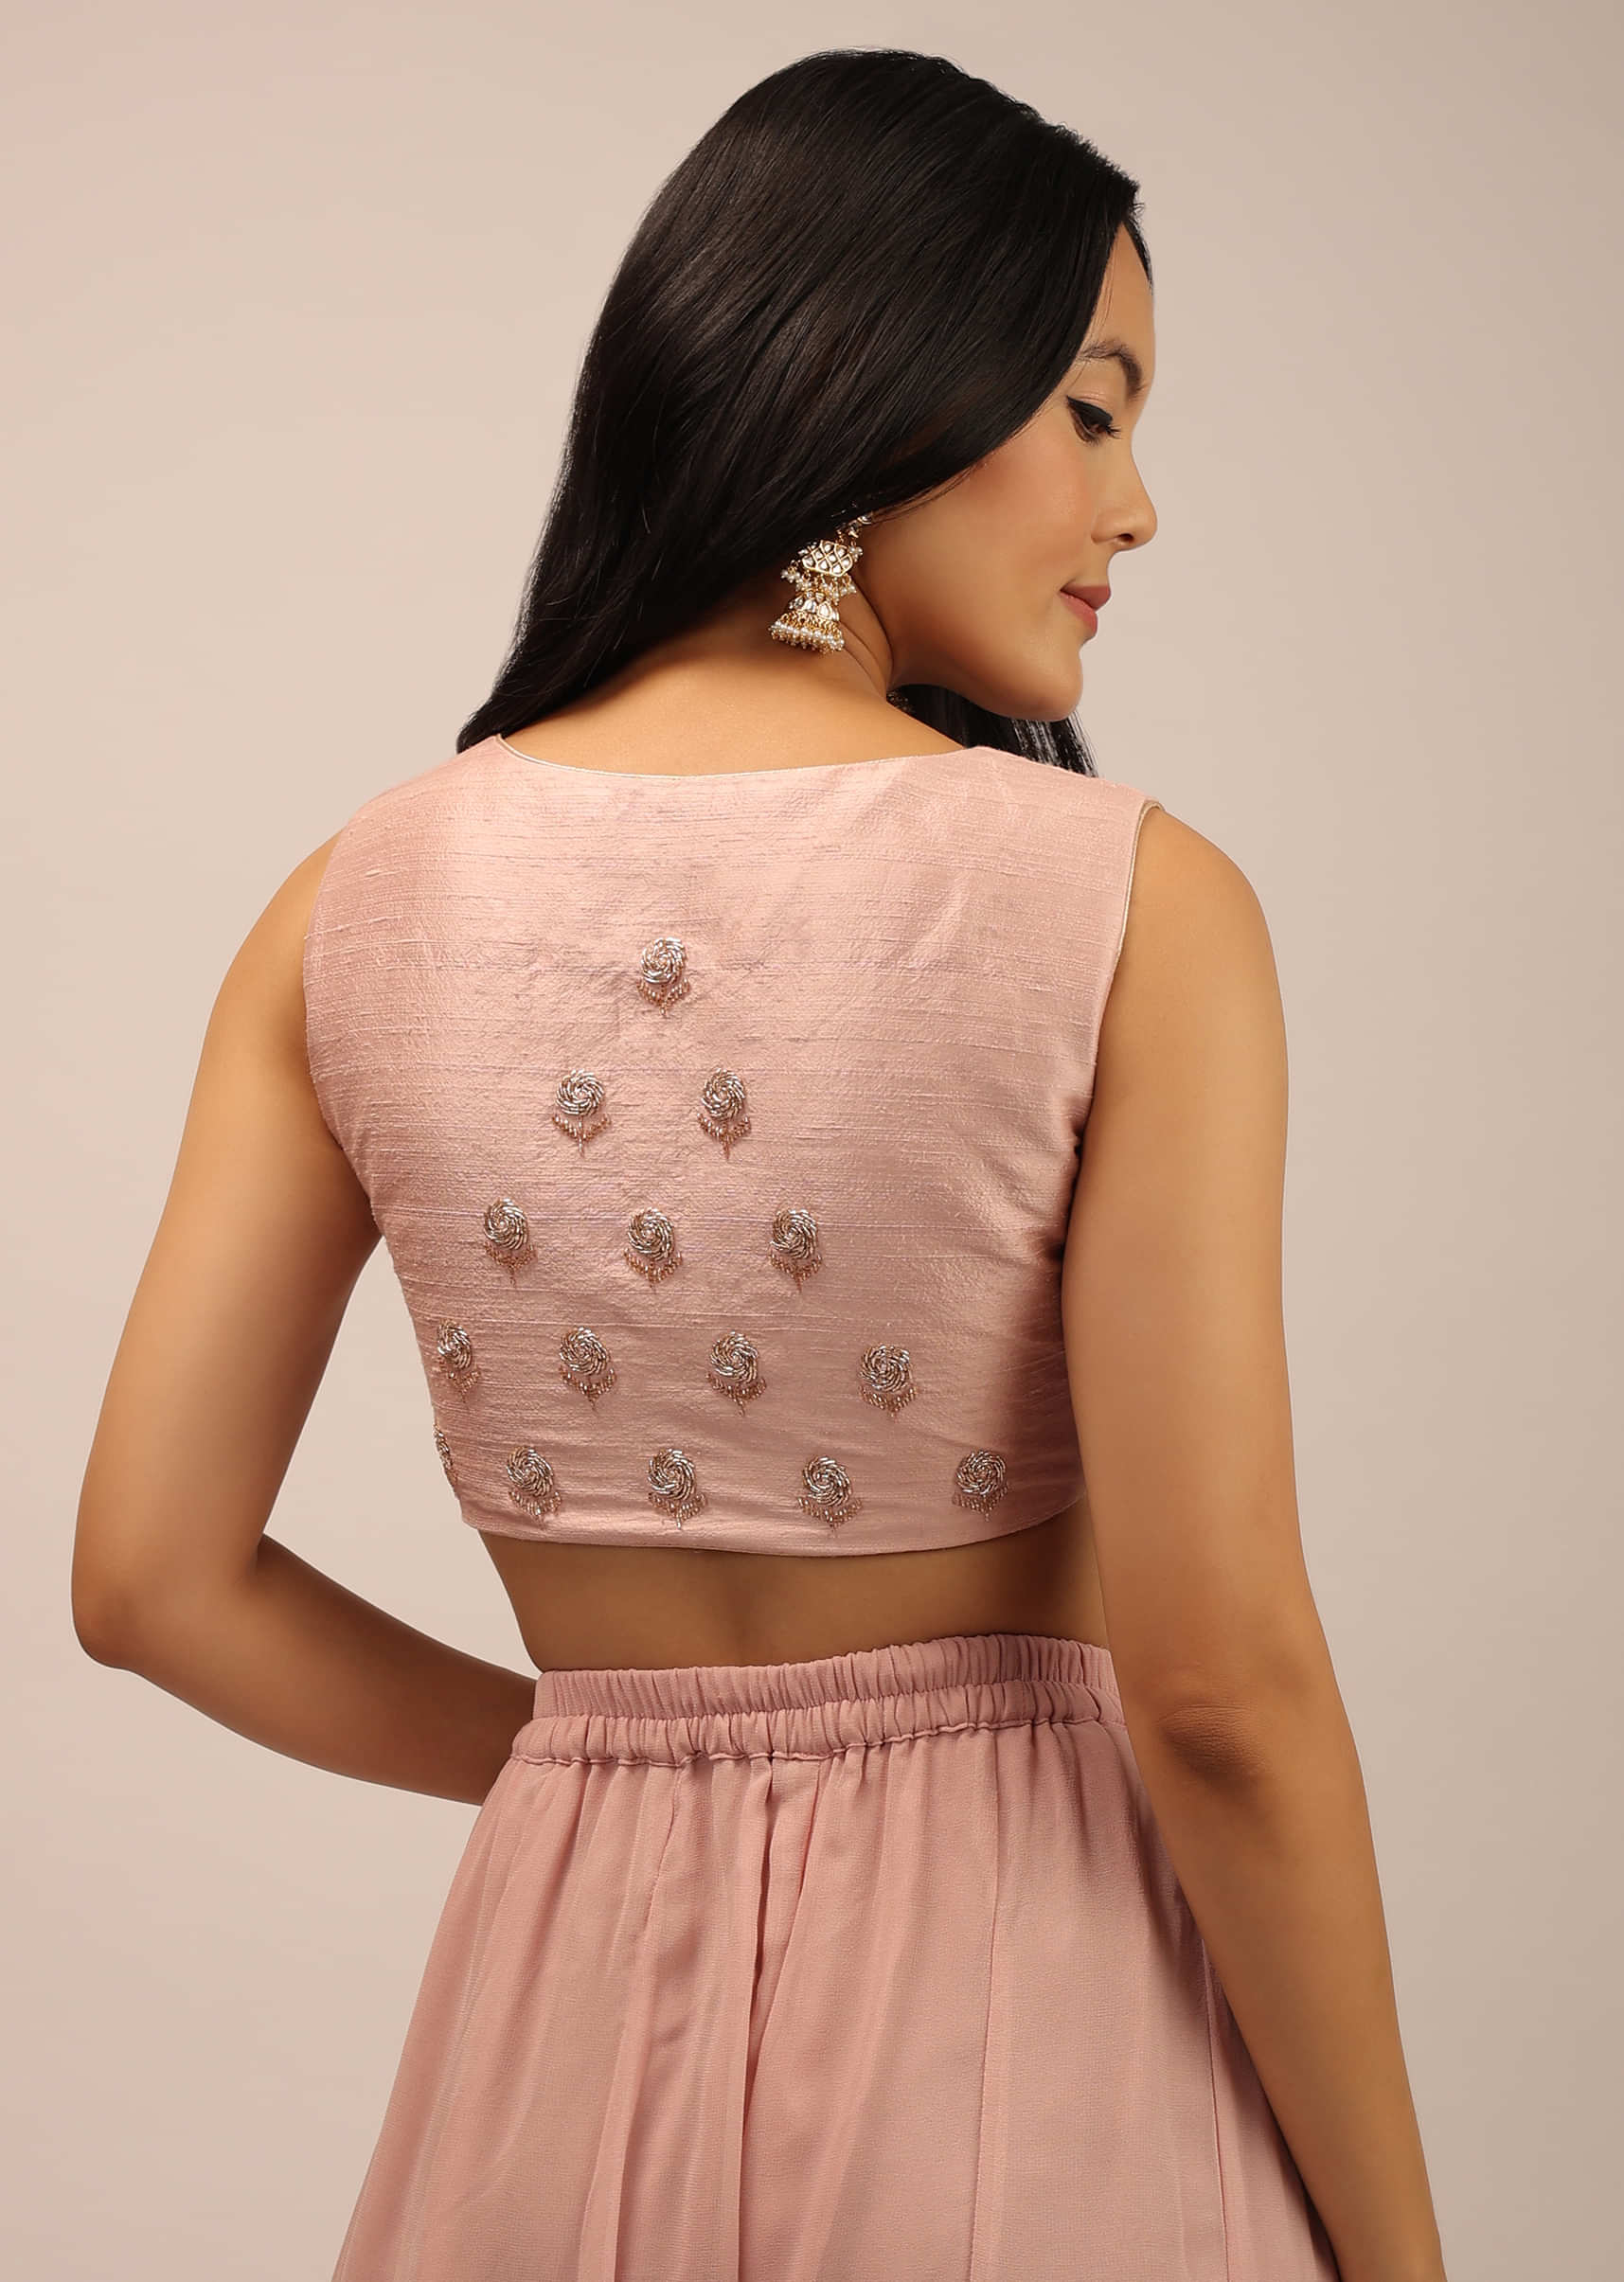 Rose Pink Padded Blouse With Overlapping Design Adorned In zardosi Work In Floral Pattern 